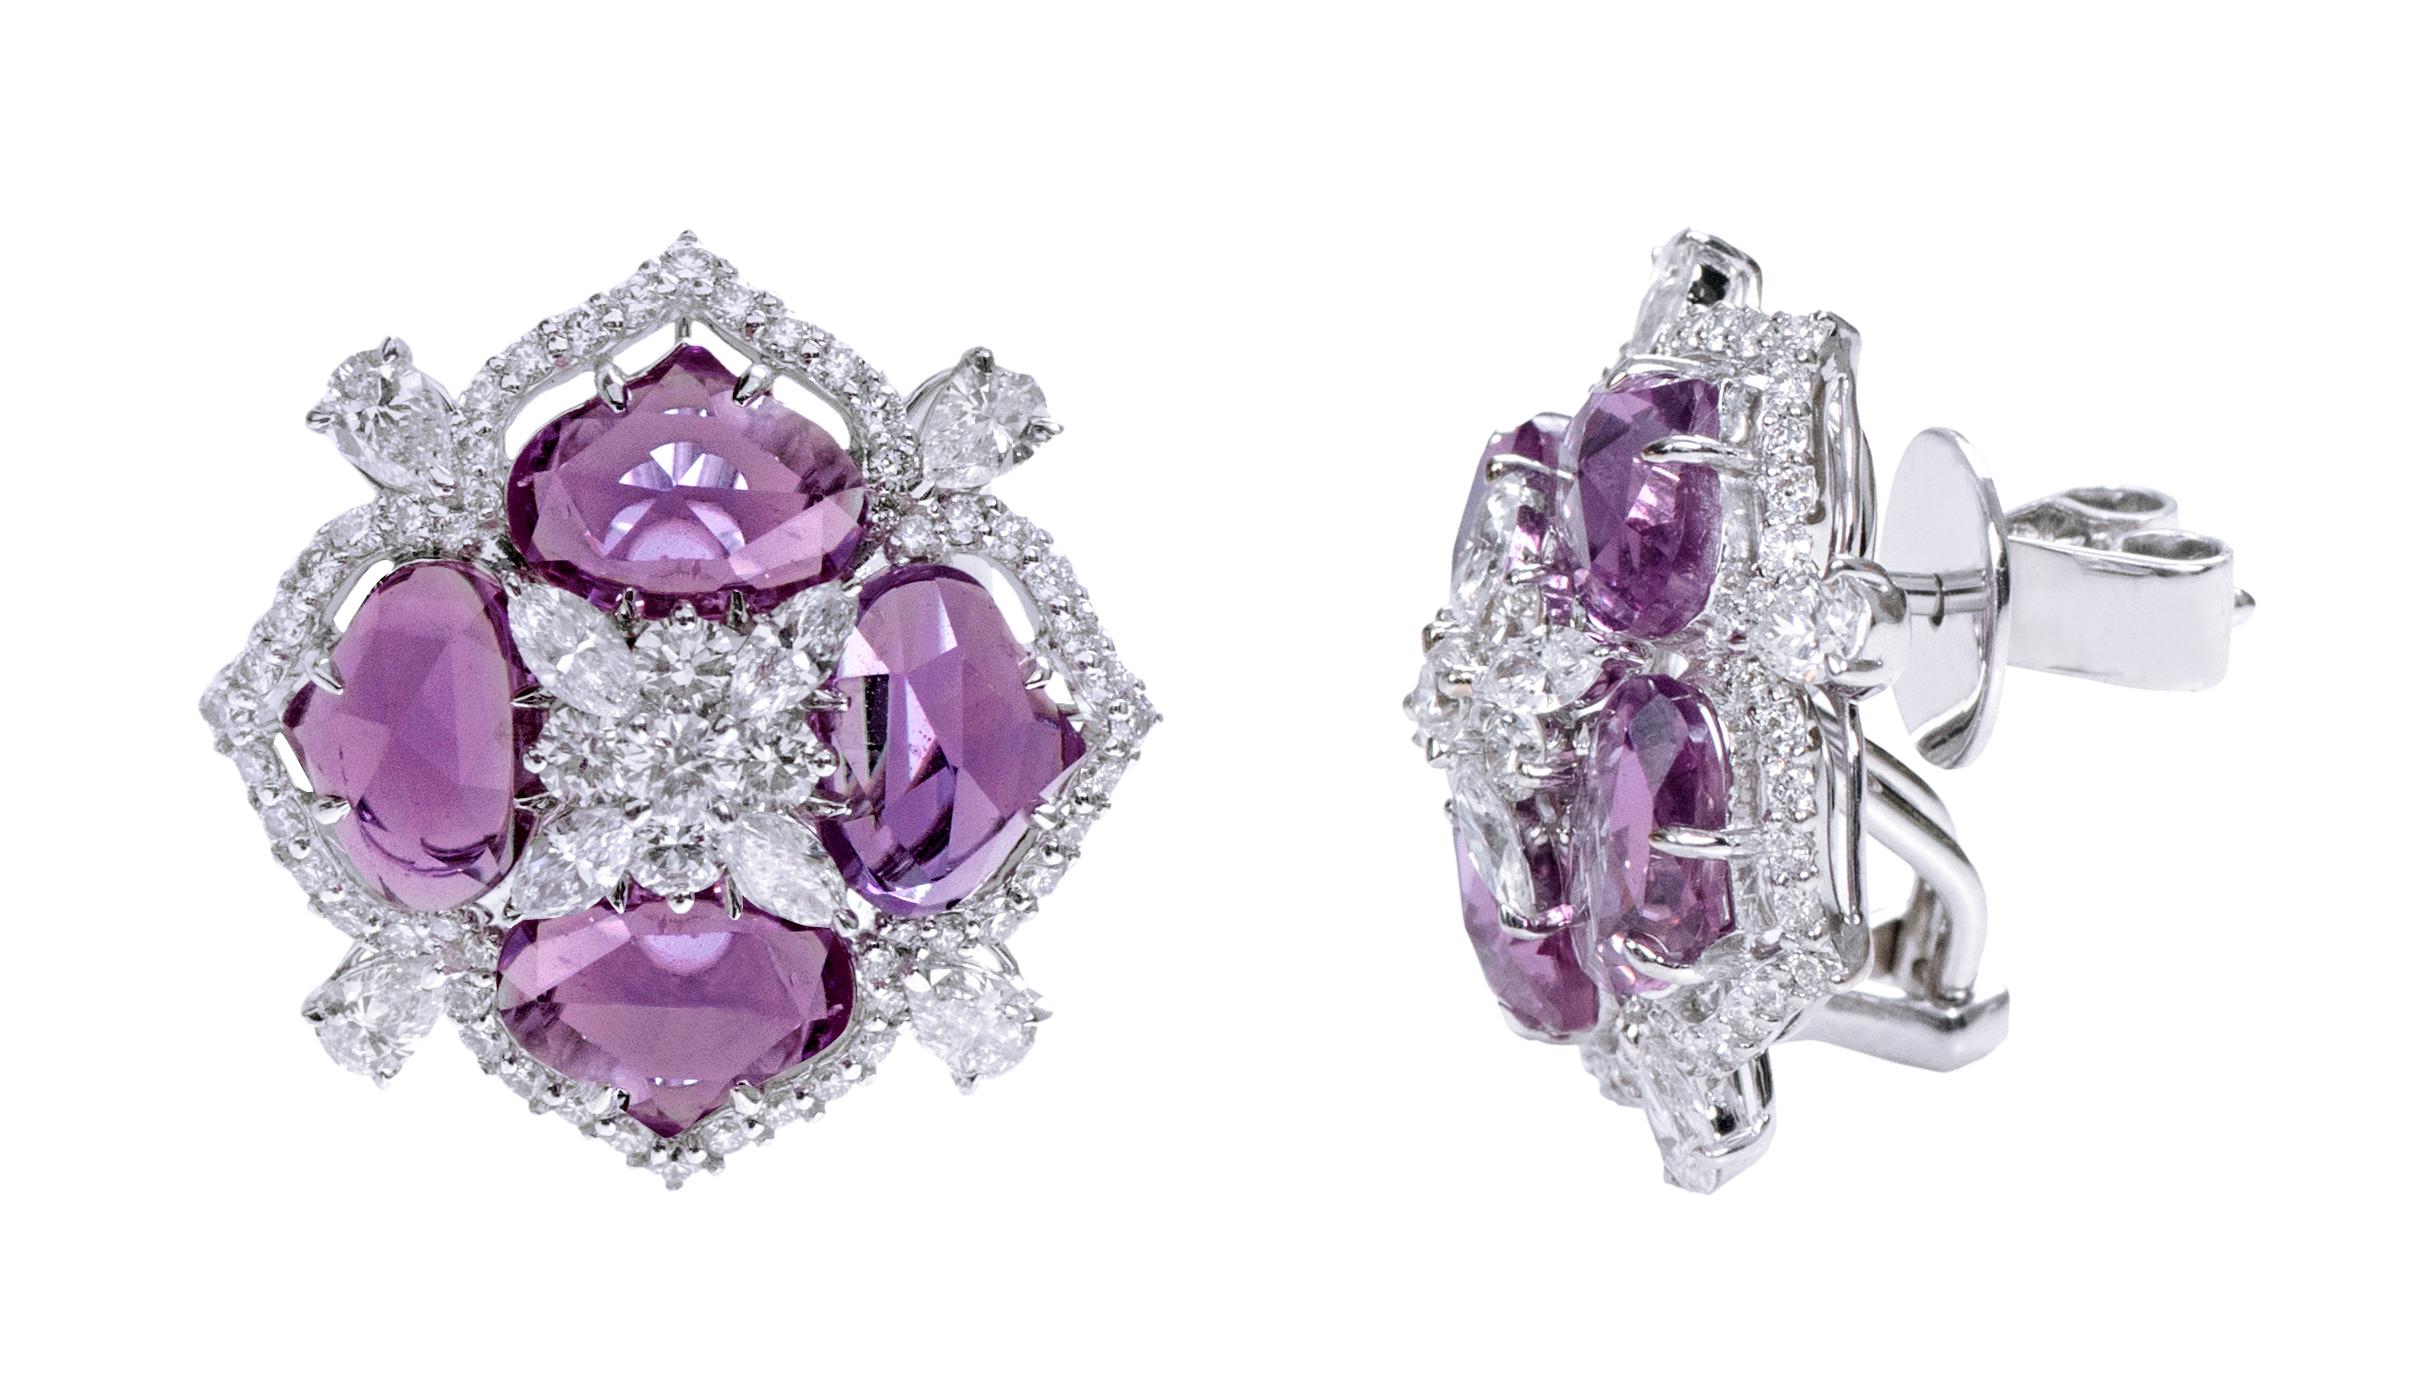 18 Karat White Gold 11.60 Carat Pink Sapphire and Diamond Cocktail Stud Earrings

These convoluted Fuschia pink sapphire and diamond earring is extraordinary. The first two layers form an artistic flower with marquise solitaire diamonds on the 4